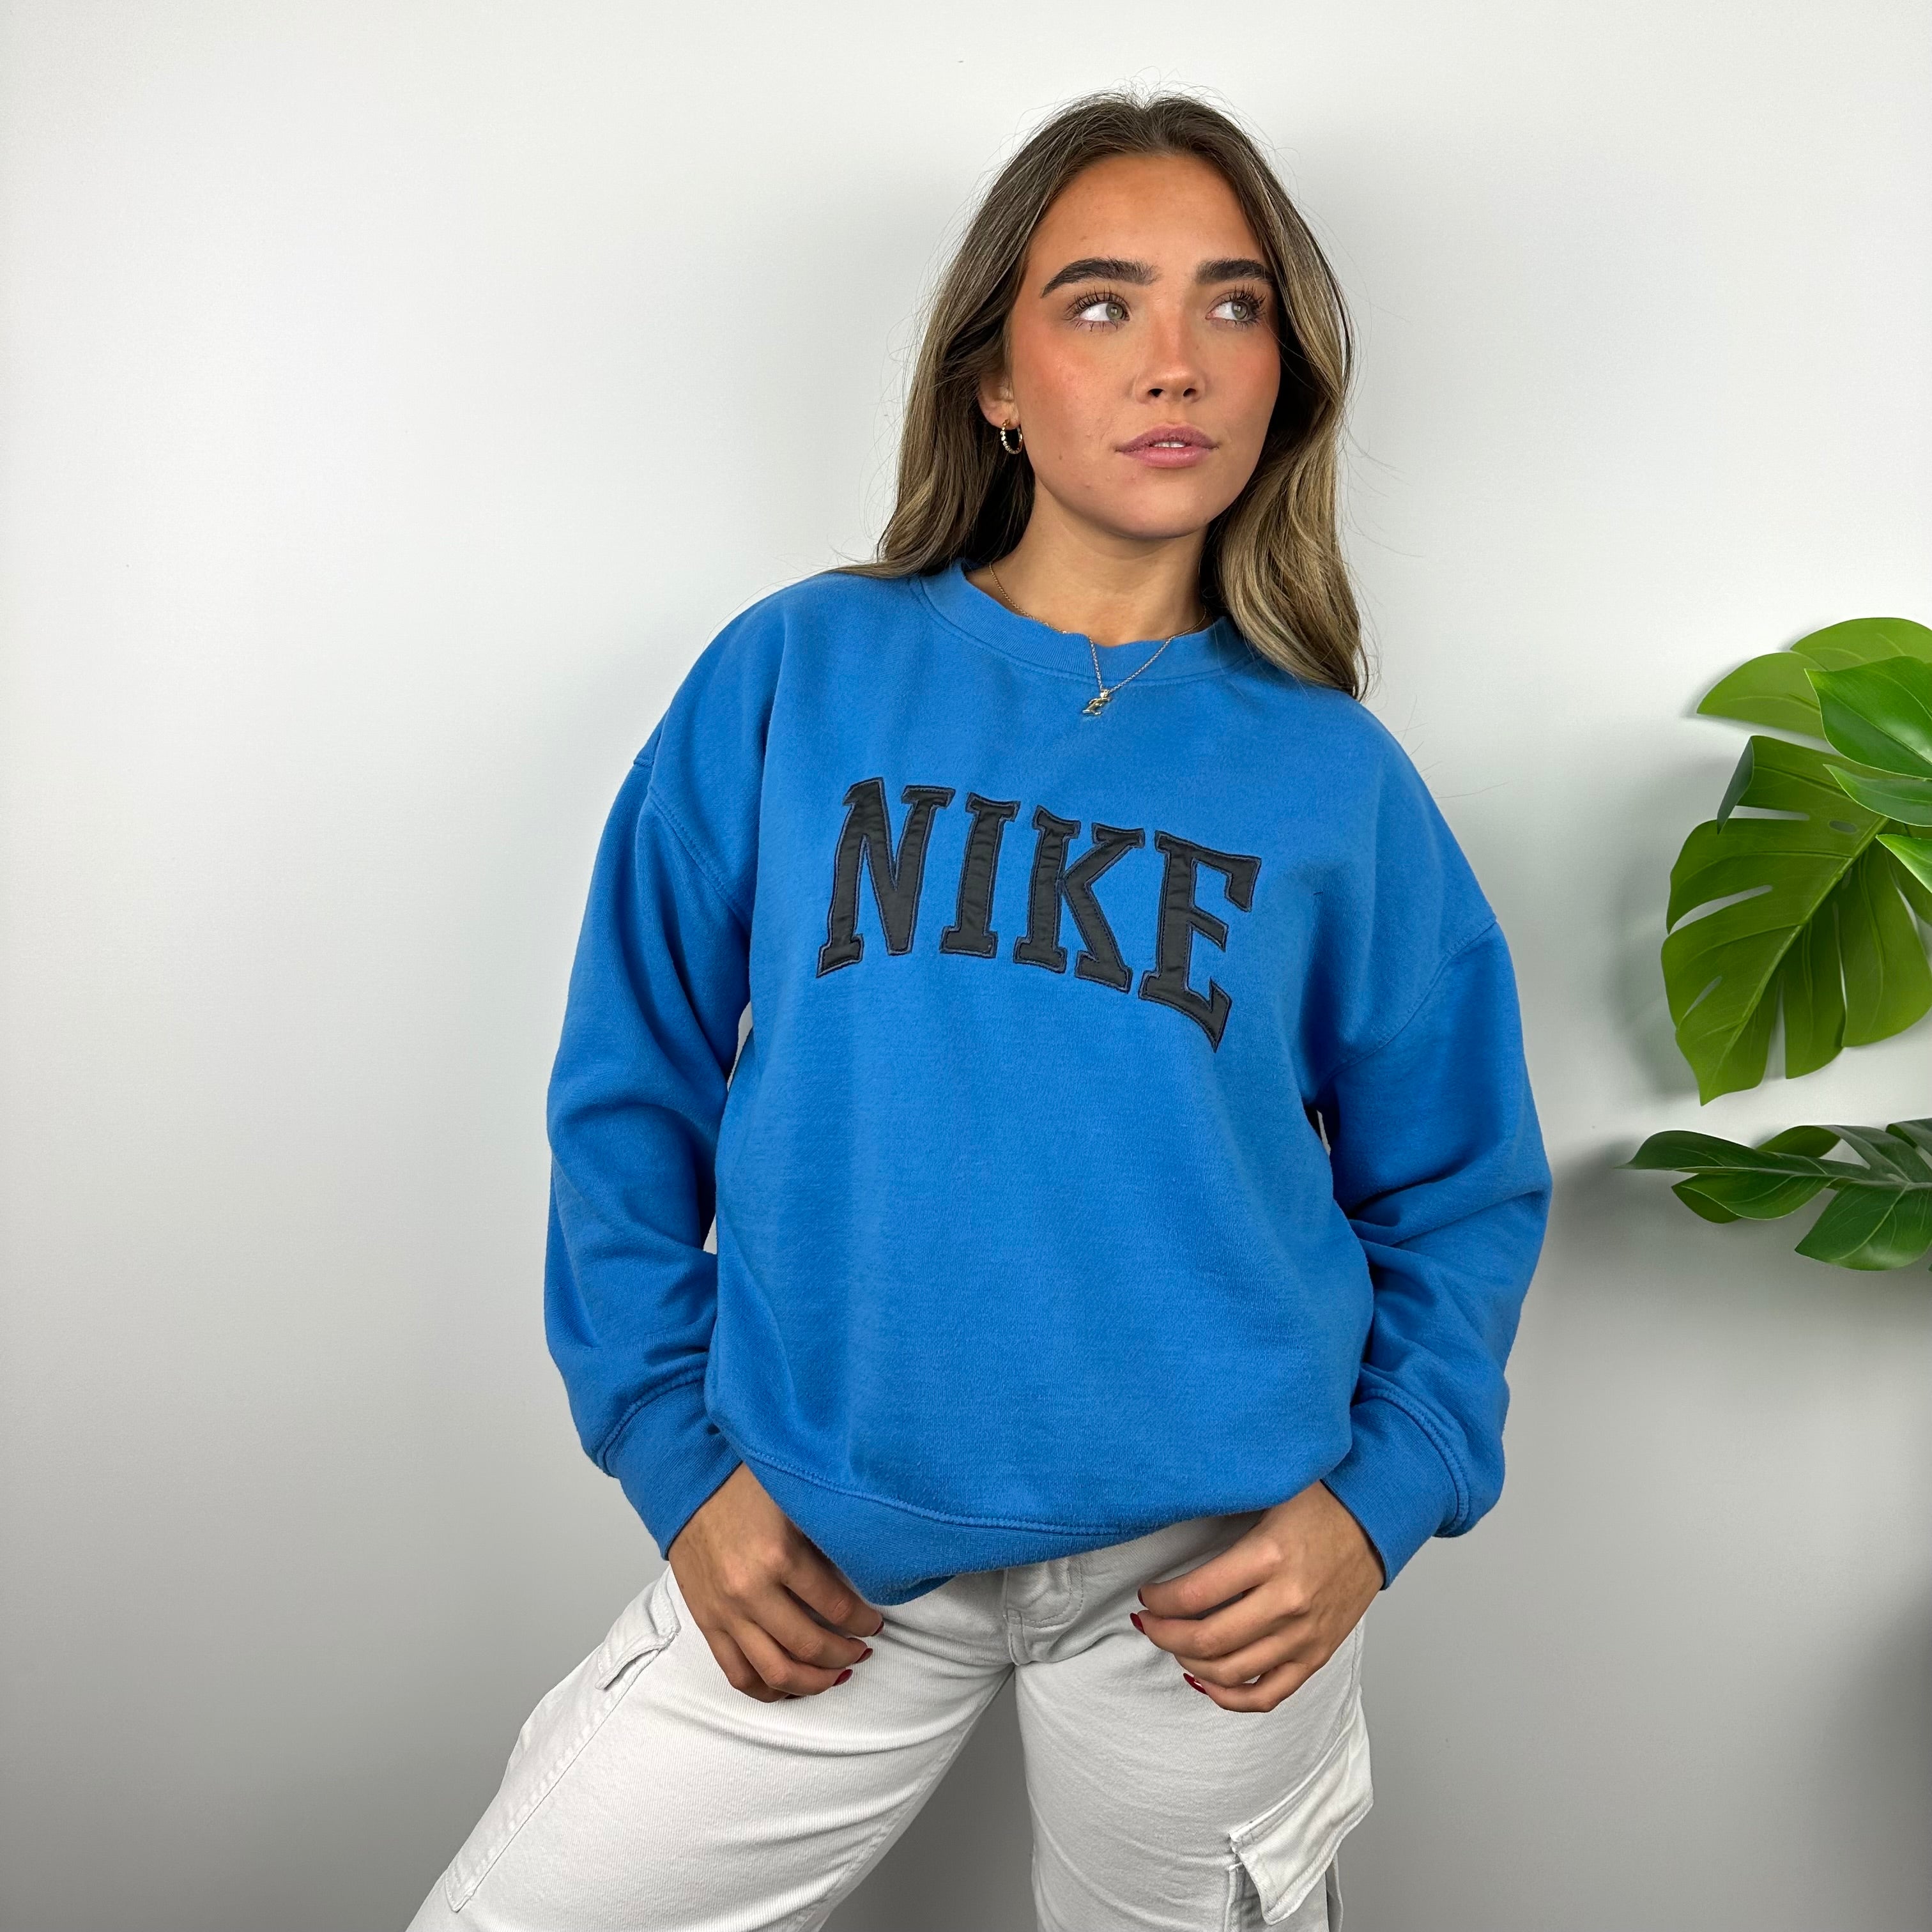 Nike Blue Embroidered Spell Out Sweatshirt (S)